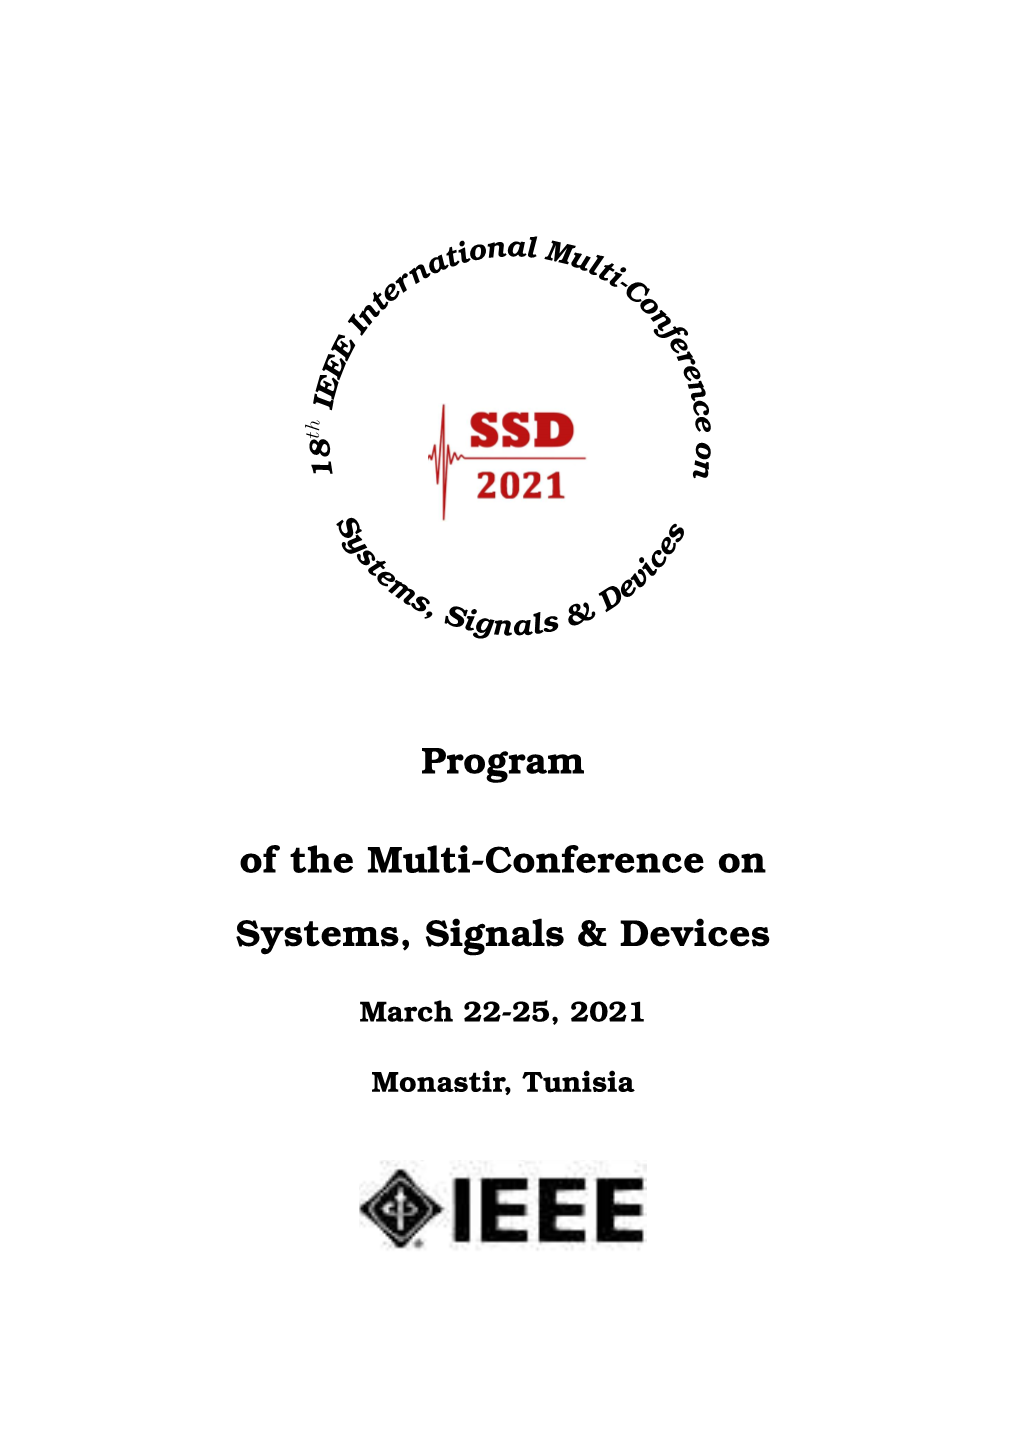 Program of the Multi-Conference on Systems, Signals & Devices